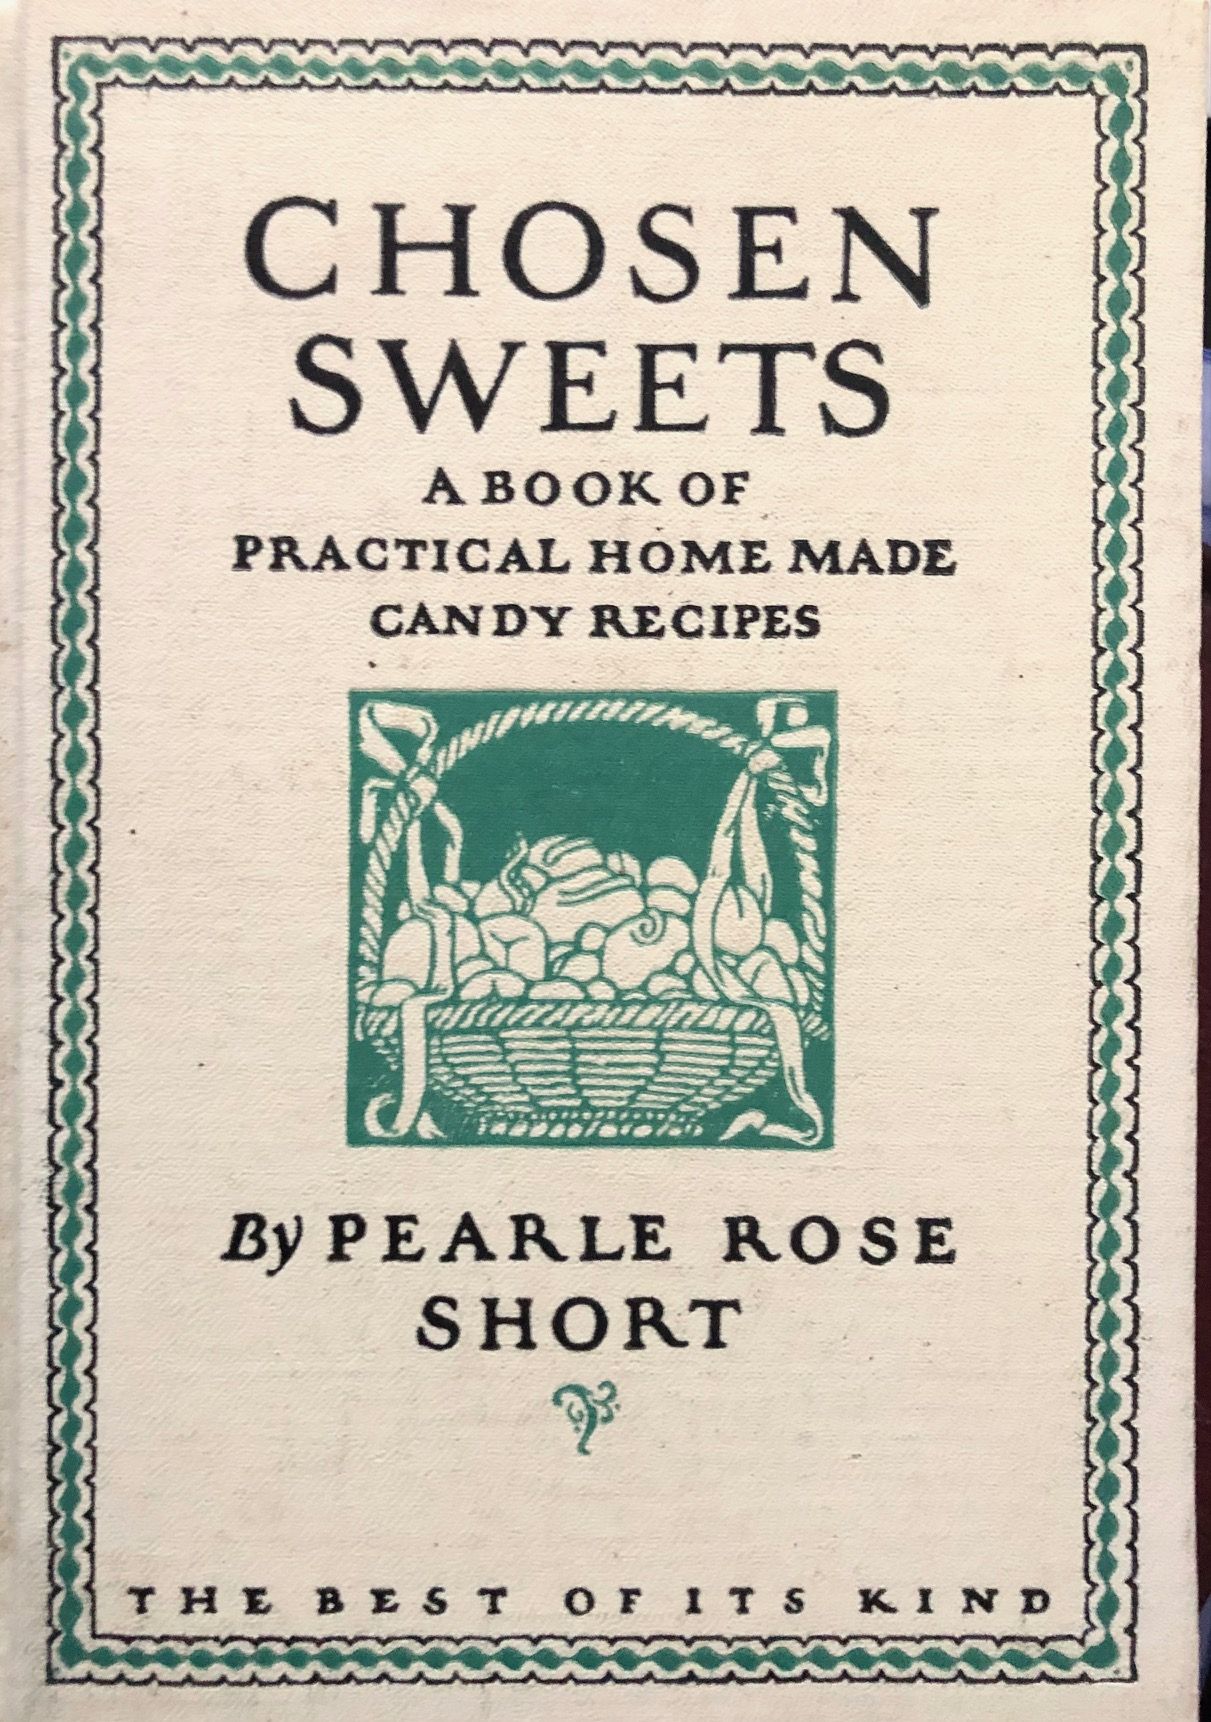 (Candy) Short, Pearle Rose. Chosen Sweets: A Book of Practical Home Made Candy Recipes.